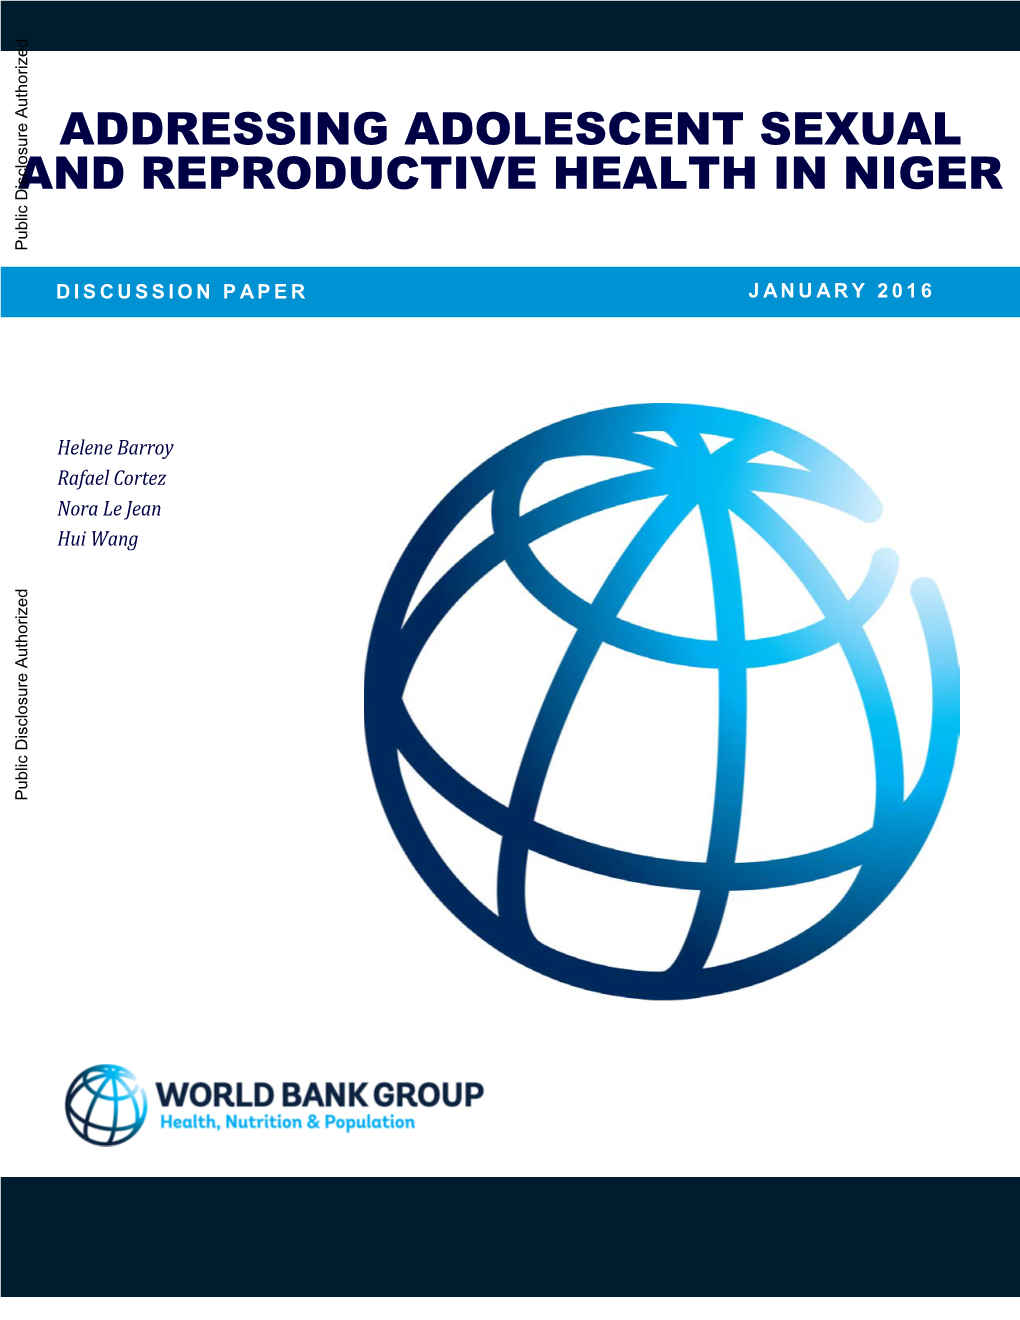 Addressing Adolescent Sexual and Reproductive Health in Niger